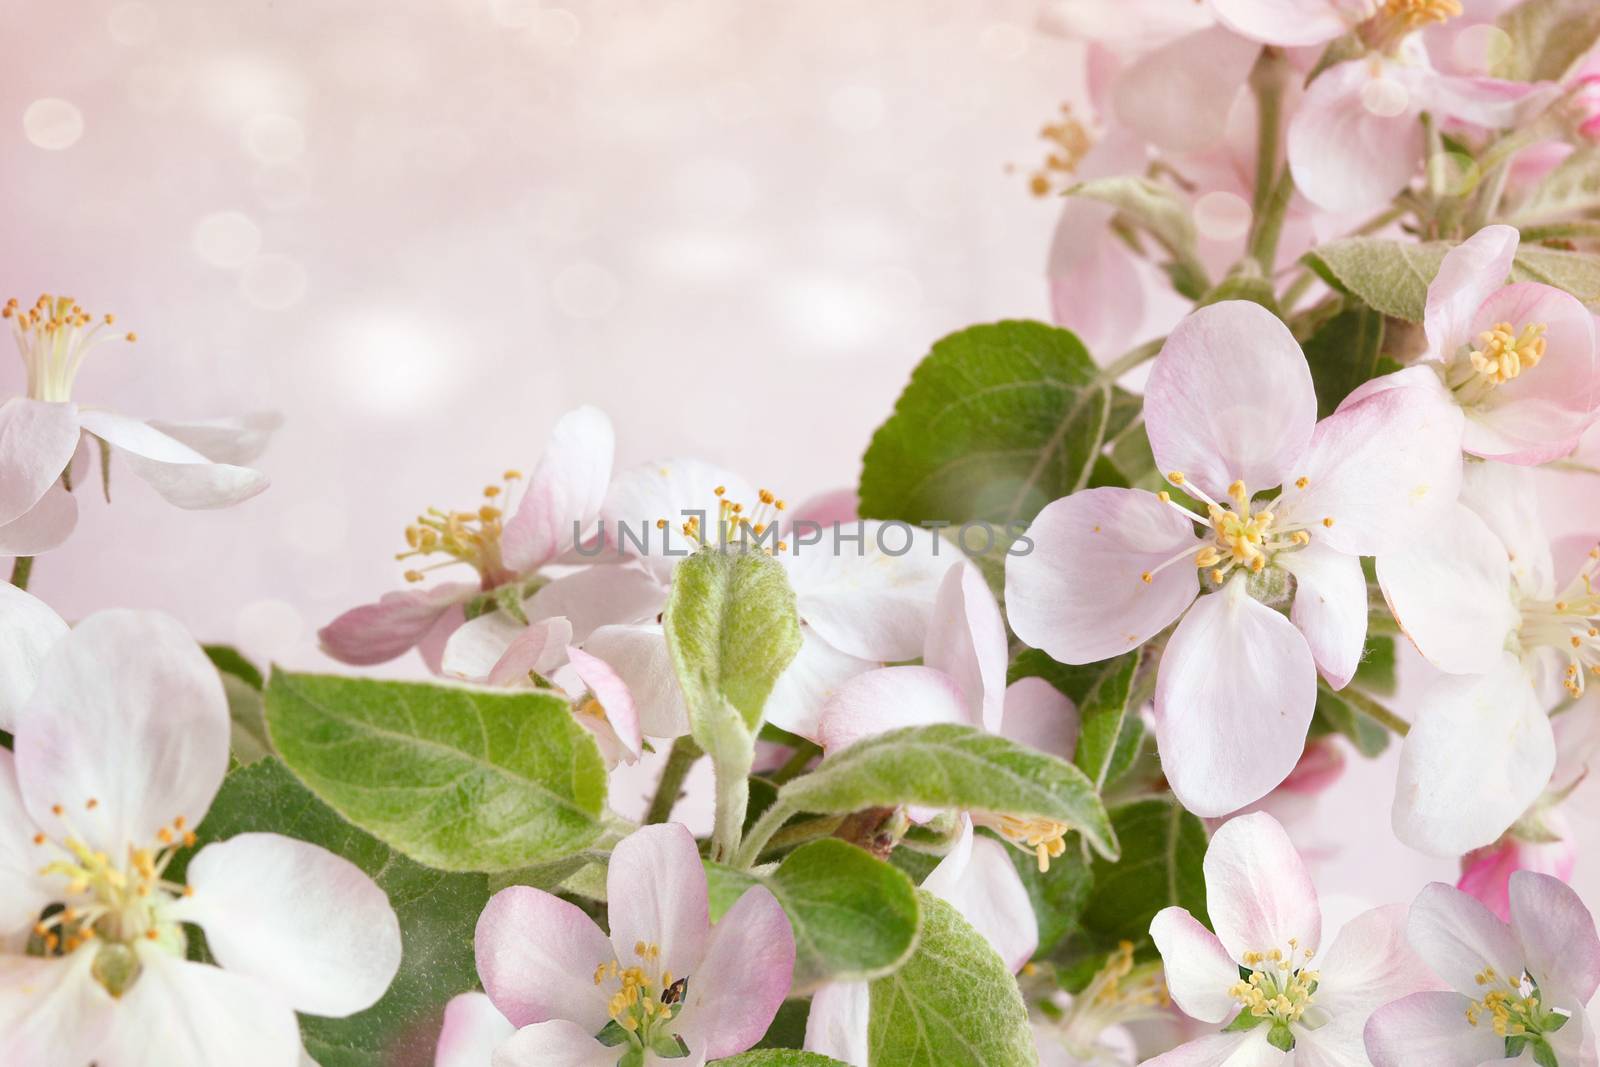 Spring blossoms against pink background by Sandralise